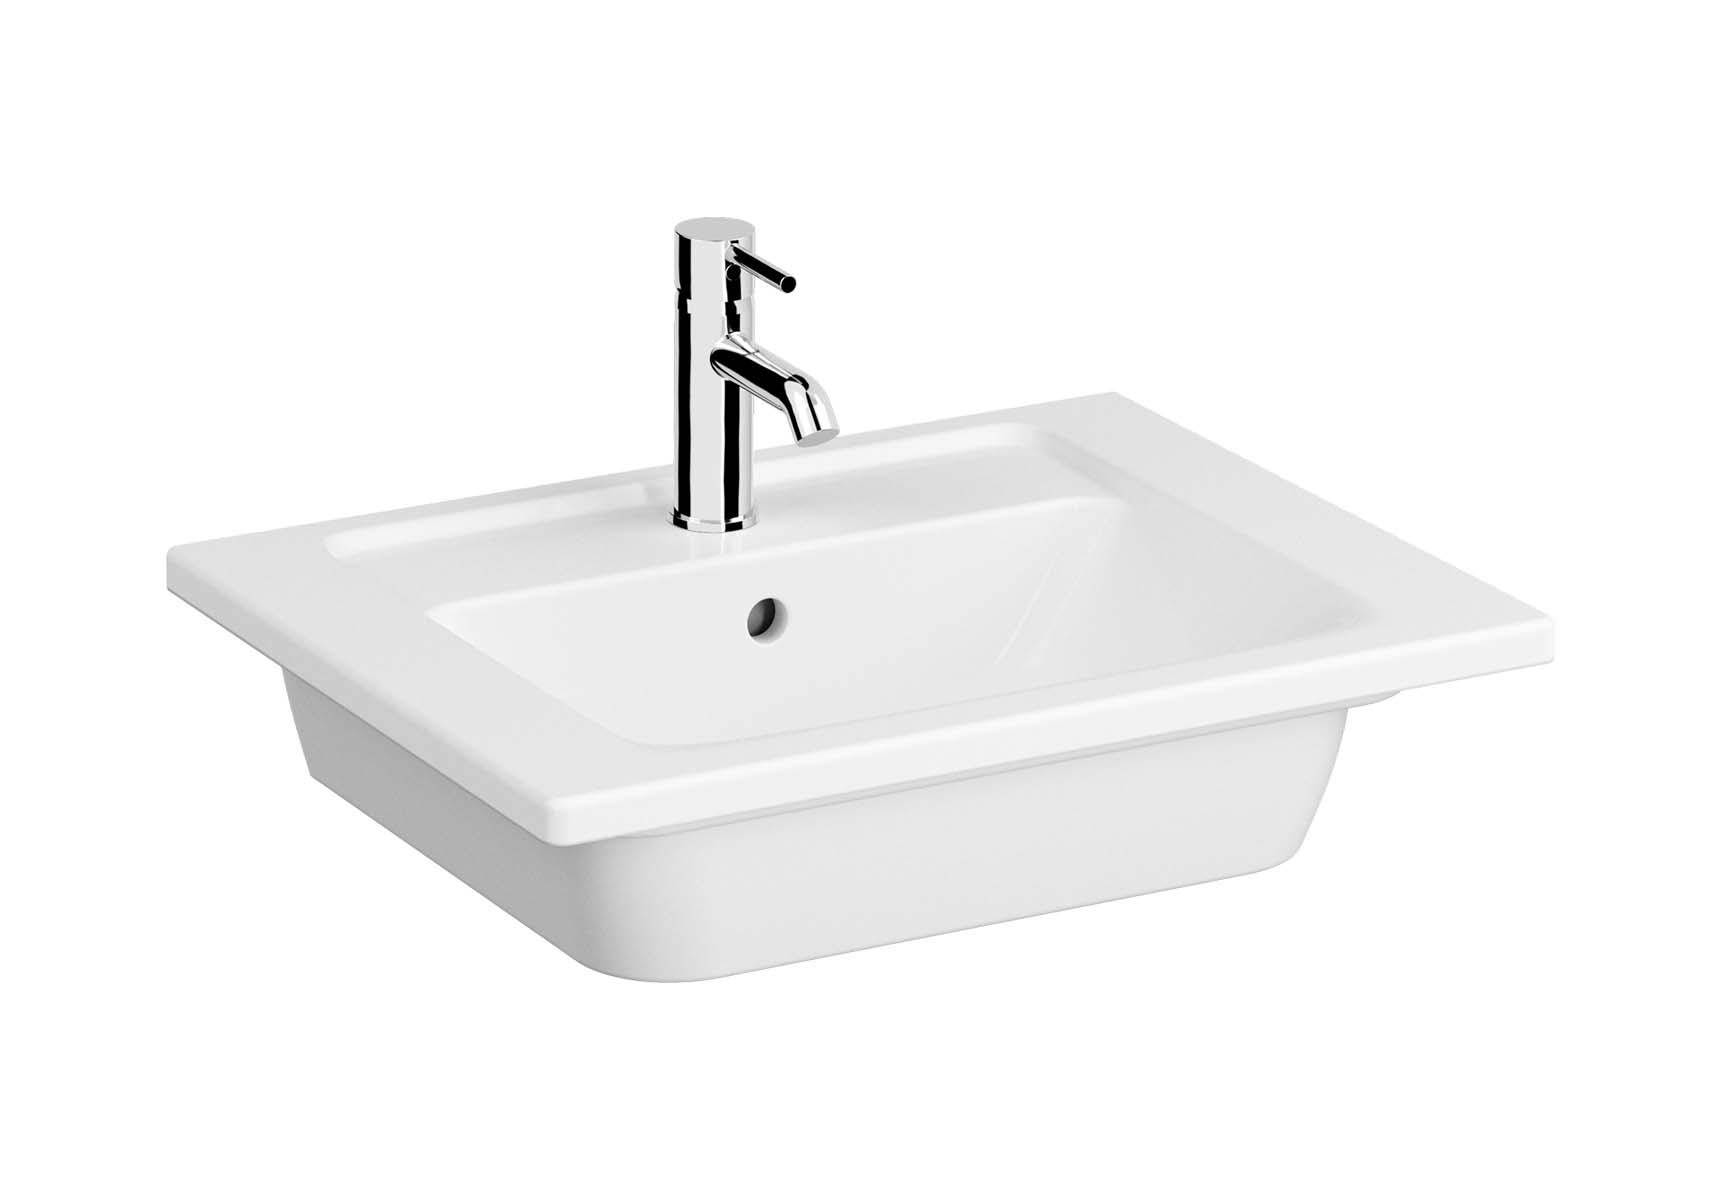 Vanity Basin, 60 cm, One Tap Hole, With Overflow Hole